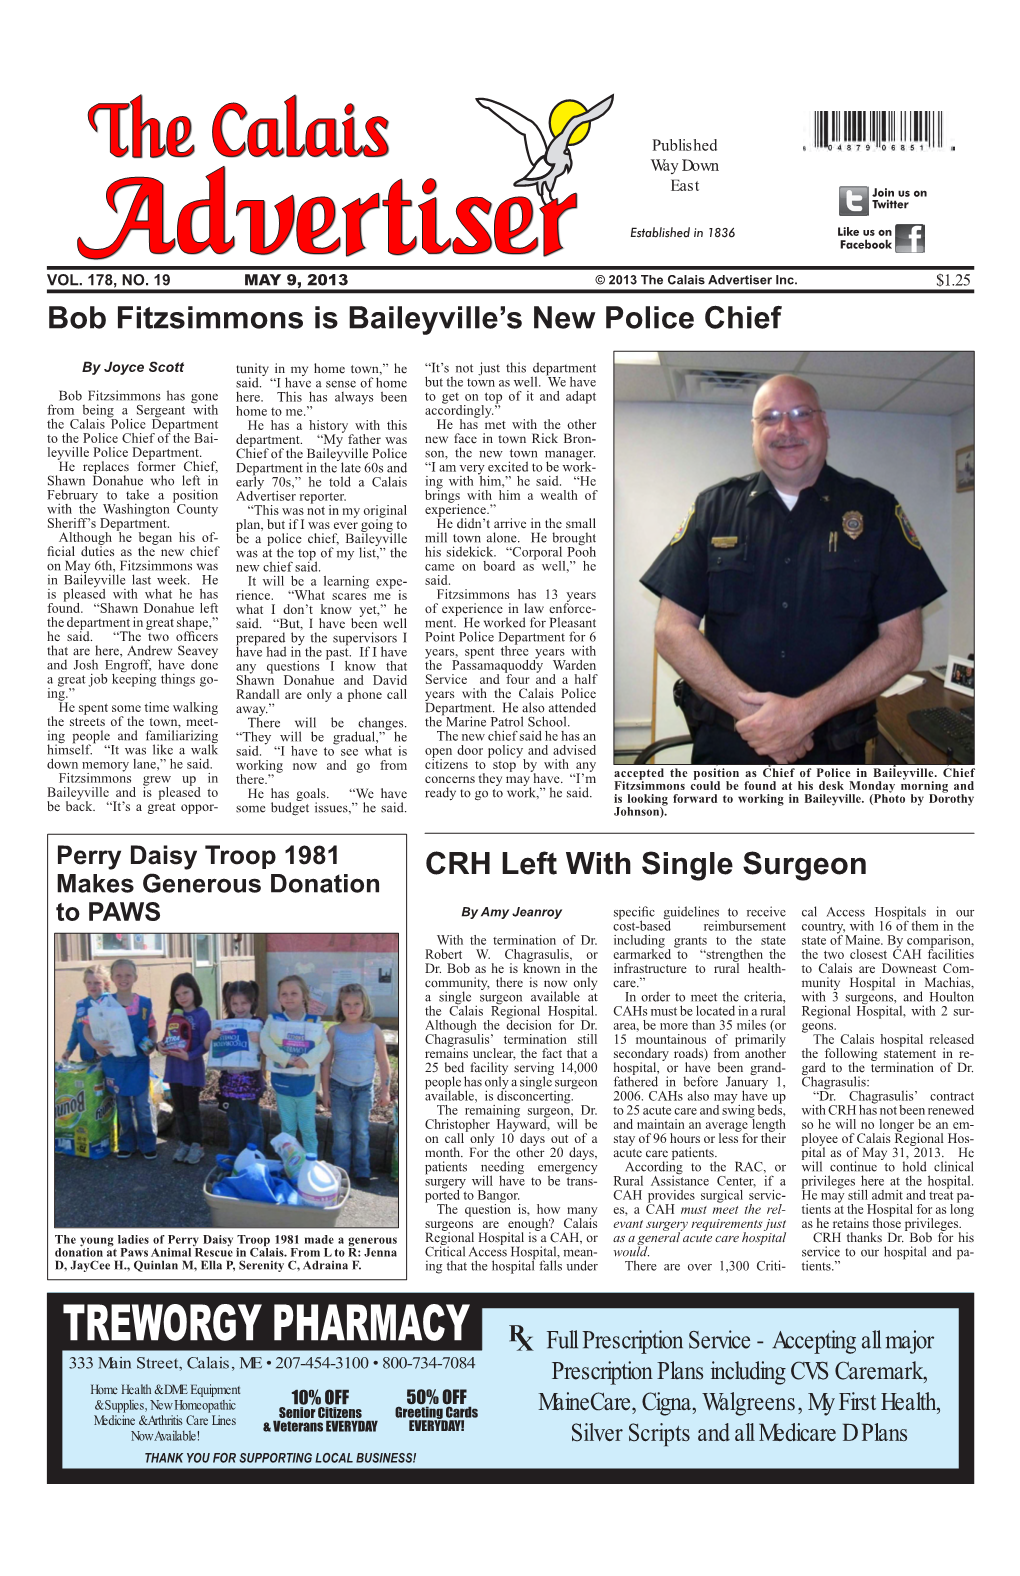 Bob Fitzsimmons Is Baileyville's New Police Chief CRH Left with Single